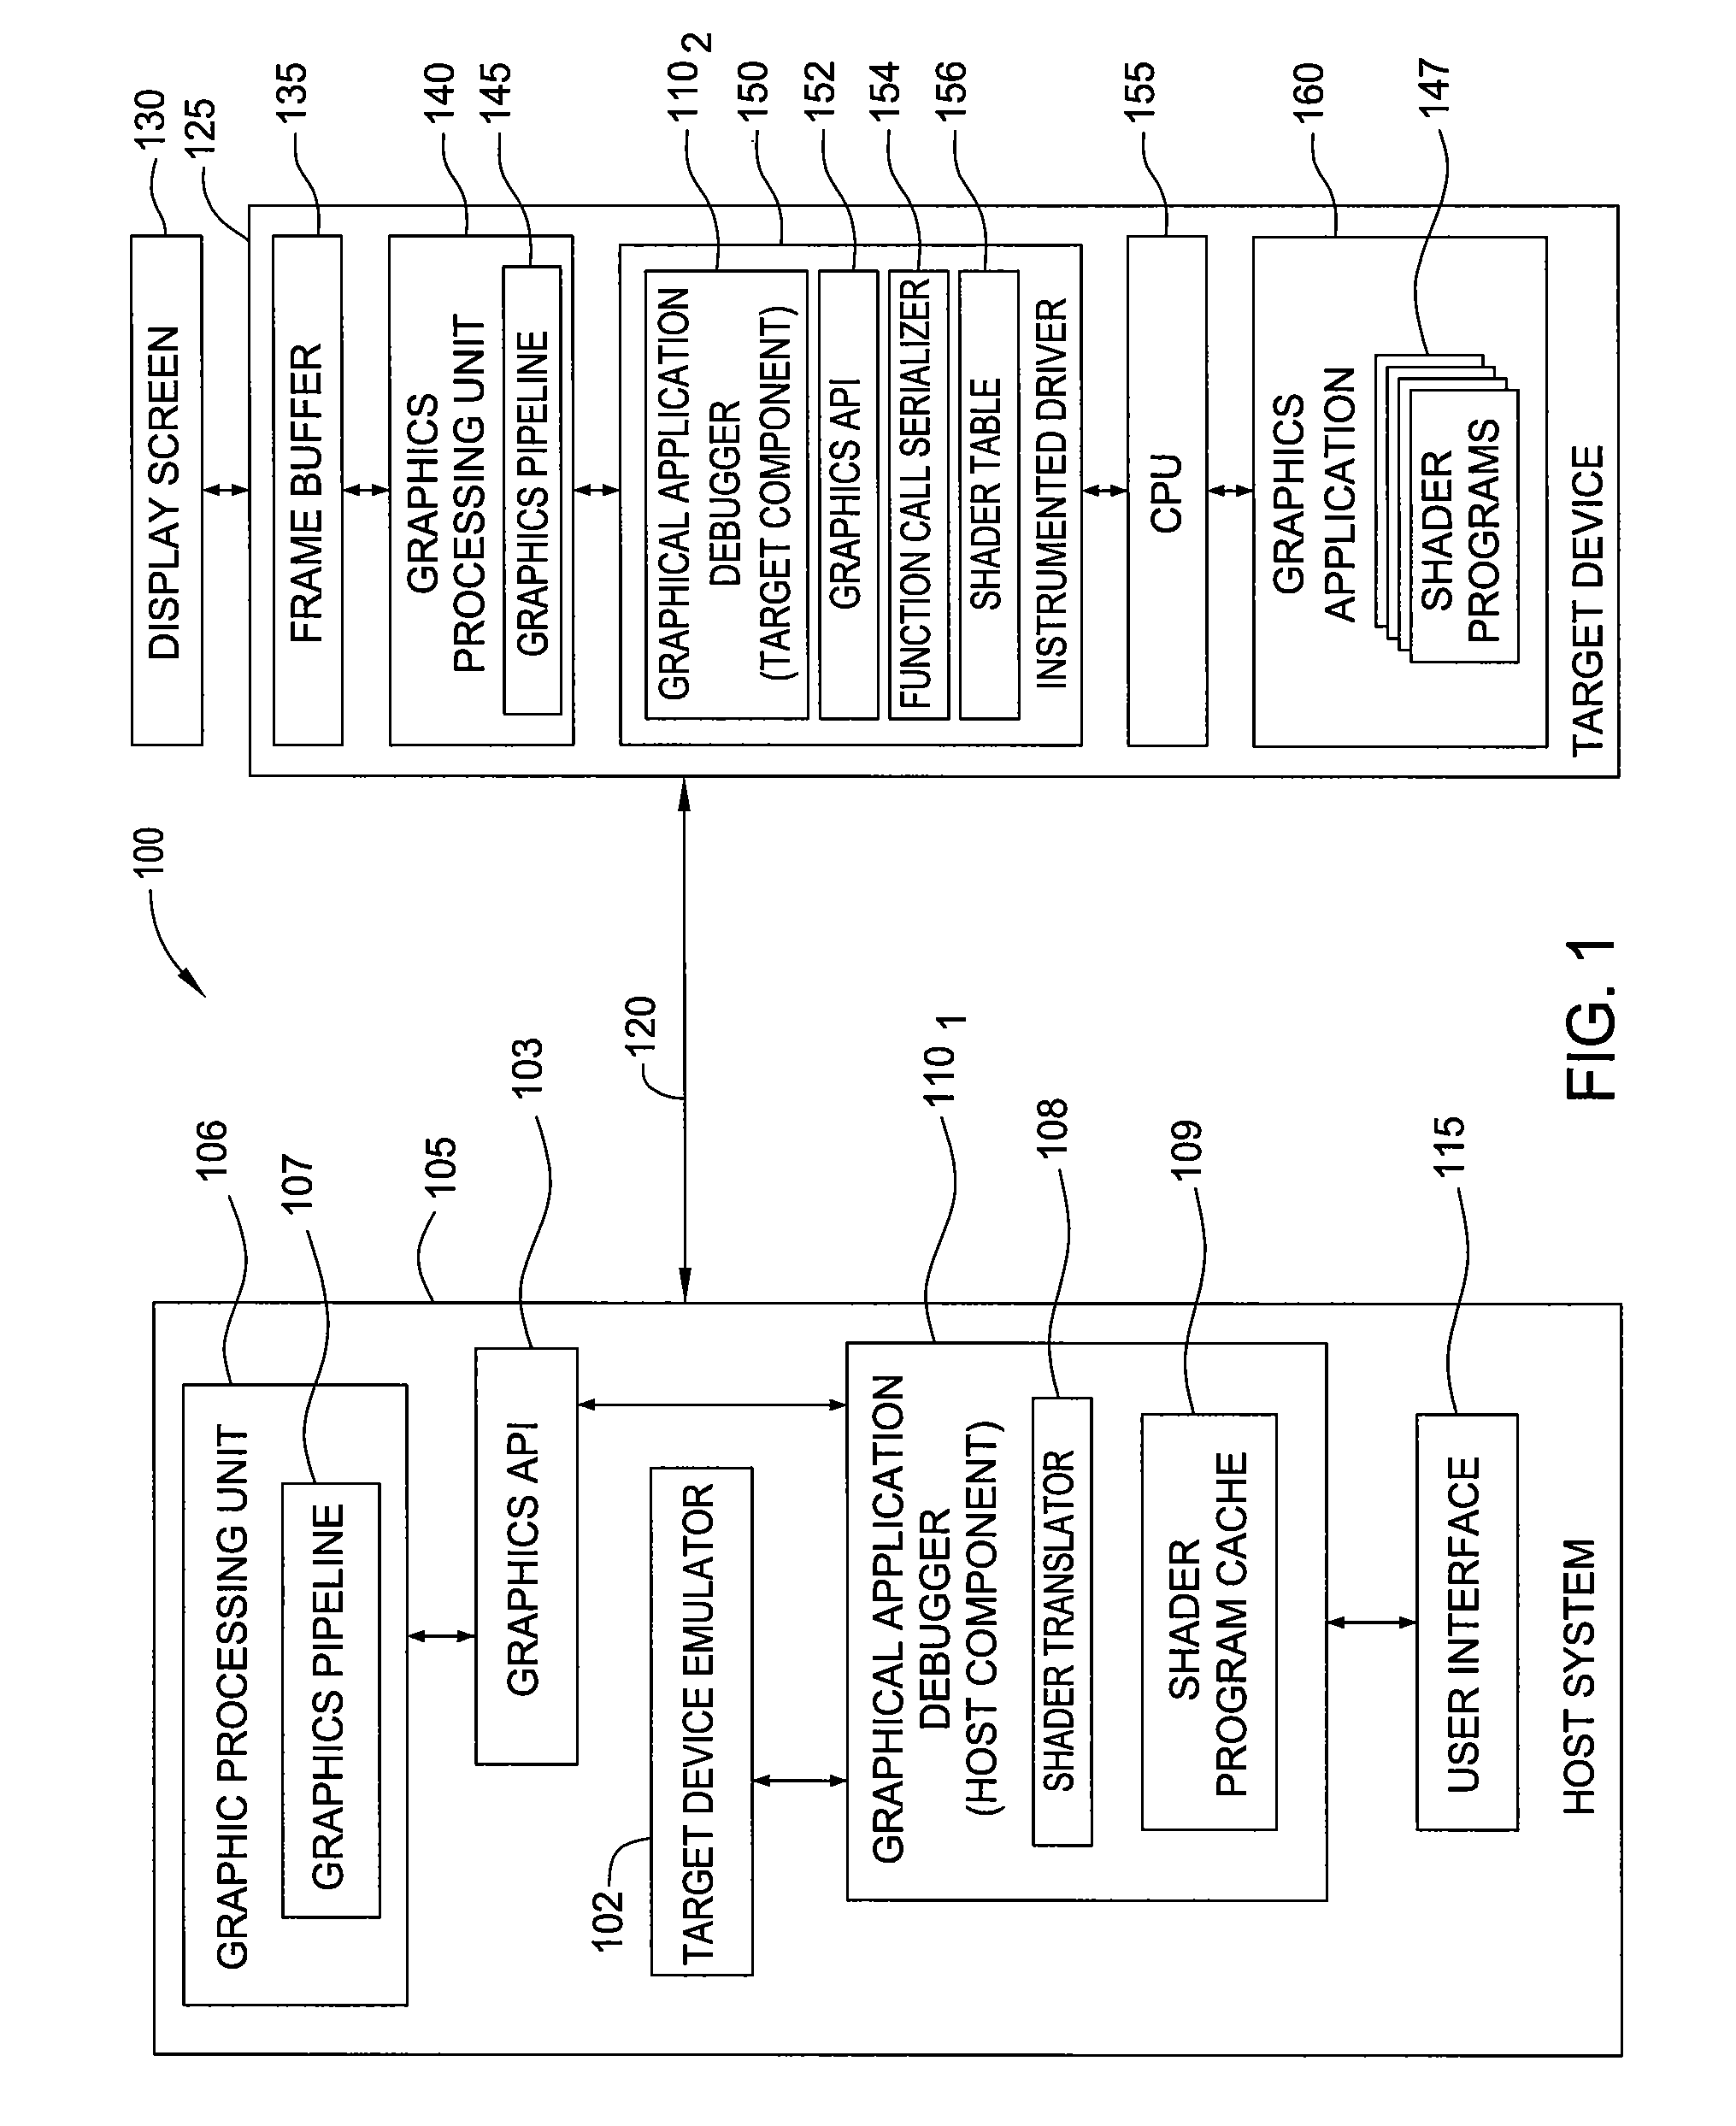 Translation of a shader assembly language binary for debugging a graphics application running on a remote device